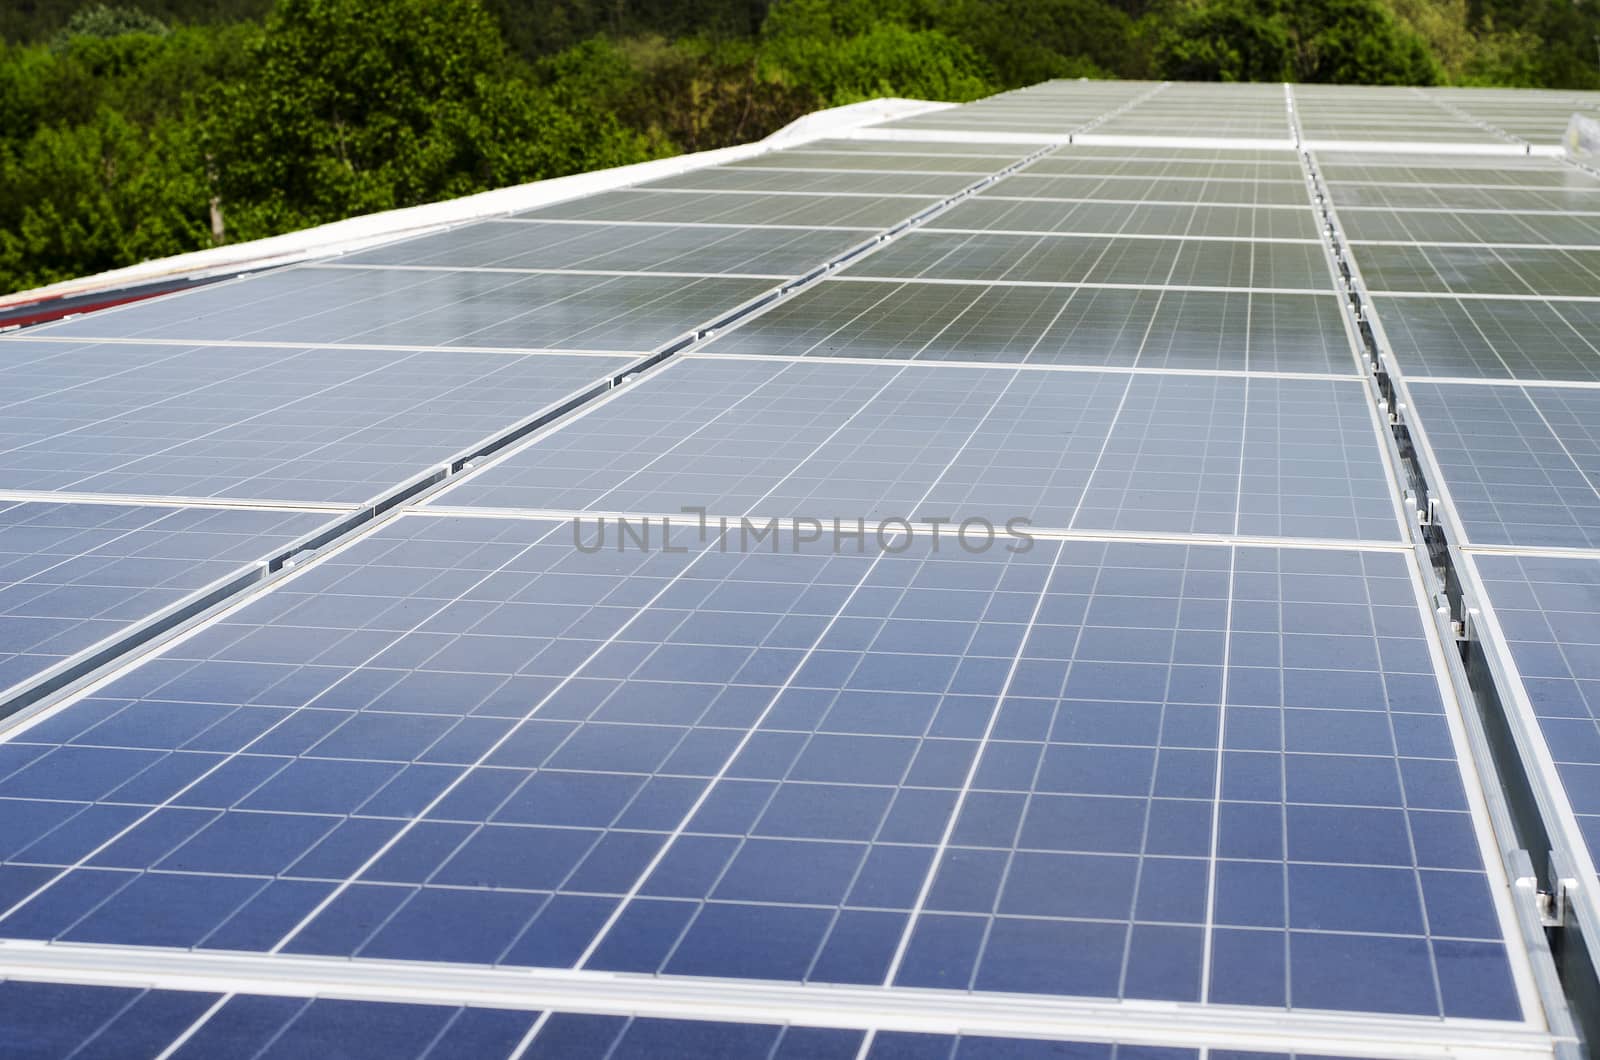 Solar panels and polycrystalline photovoltaic cells by eenevski